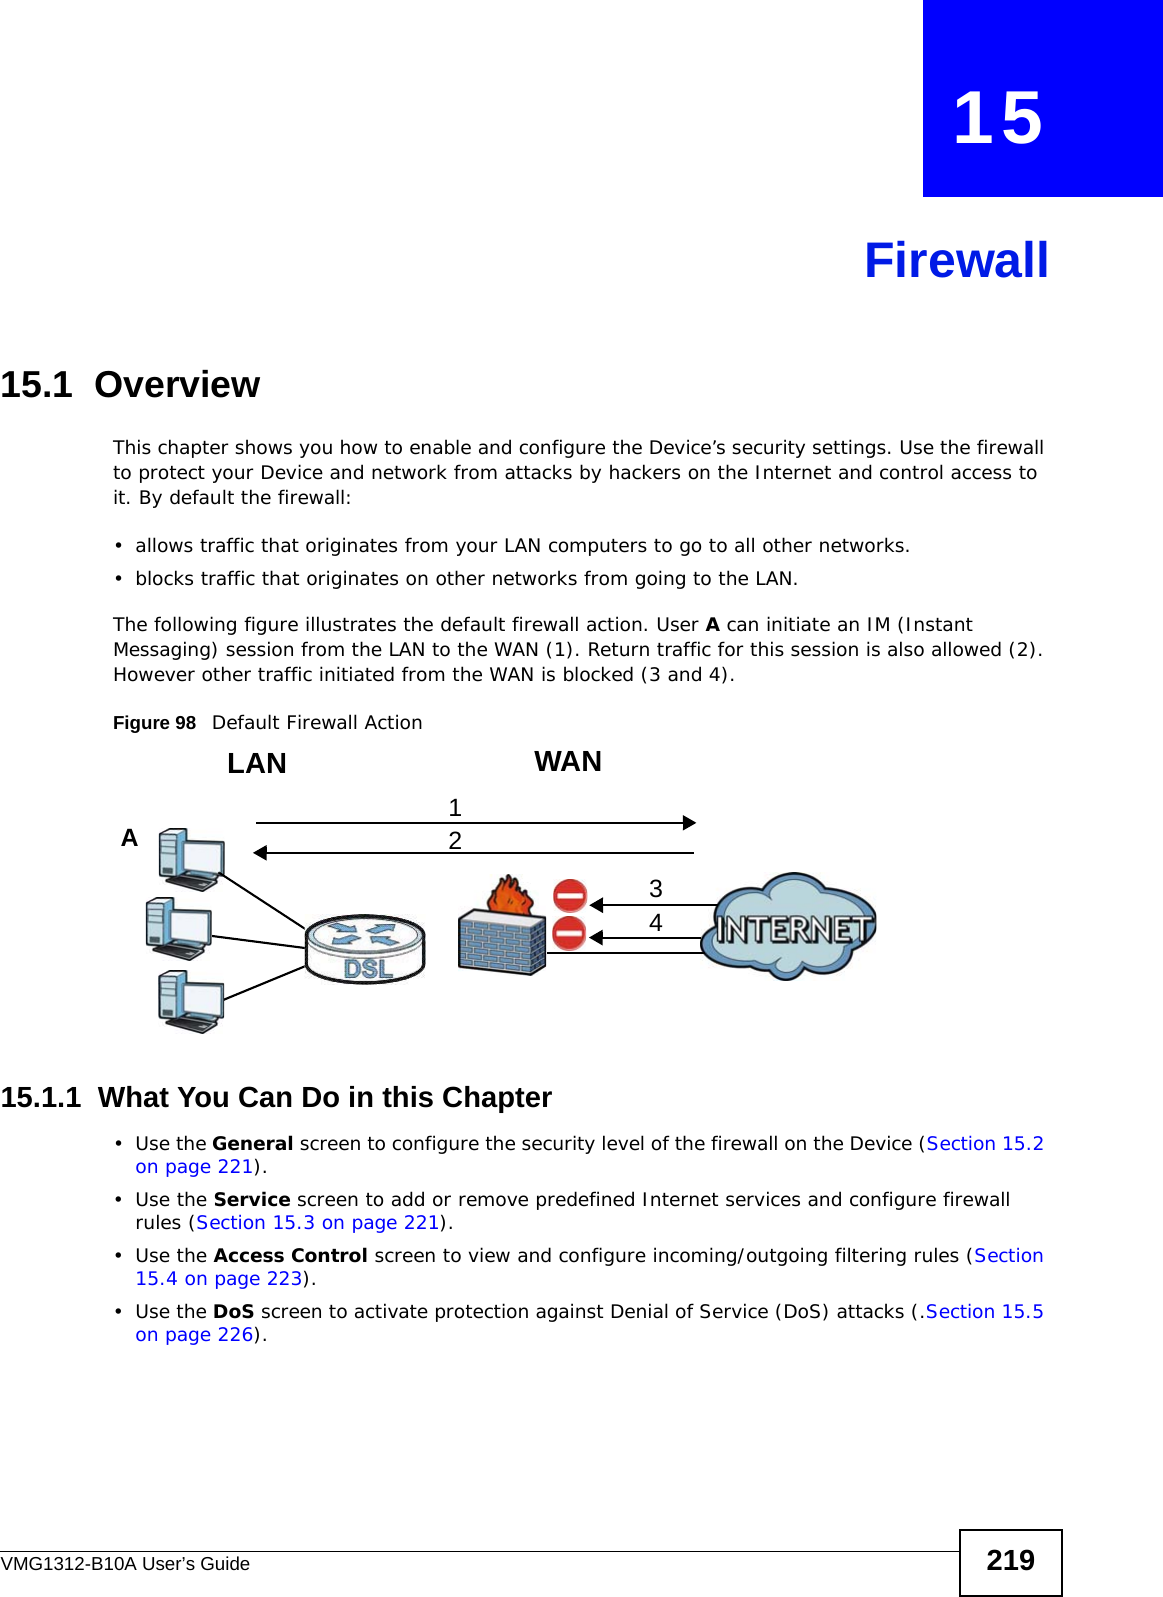 VMG1312-B10A User’s Guide 219CHAPTER   15Firewall15.1  OverviewThis chapter shows you how to enable and configure the Device’s security settings. Use the firewall to protect your Device and network from attacks by hackers on the Internet and control access to it. By default the firewall:• allows traffic that originates from your LAN computers to go to all other networks. • blocks traffic that originates on other networks from going to the LAN. The following figure illustrates the default firewall action. User A can initiate an IM (Instant Messaging) session from the LAN to the WAN (1). Return traffic for this session is also allowed (2). However other traffic initiated from the WAN is blocked (3 and 4).Figure 98   Default Firewall Action15.1.1  What You Can Do in this Chapter•Use the General screen to configure the security level of the firewall on the Device (Section 15.2 on page 221).•Use the Service screen to add or remove predefined Internet services and configure firewall rules (Section 15.3 on page 221).•Use the Access Control screen to view and configure incoming/outgoing filtering rules (Section 15.4 on page 223). •Use the DoS screen to activate protection against Denial of Service (DoS) attacks (.Section 15.5 on page 226).WANLAN3412A